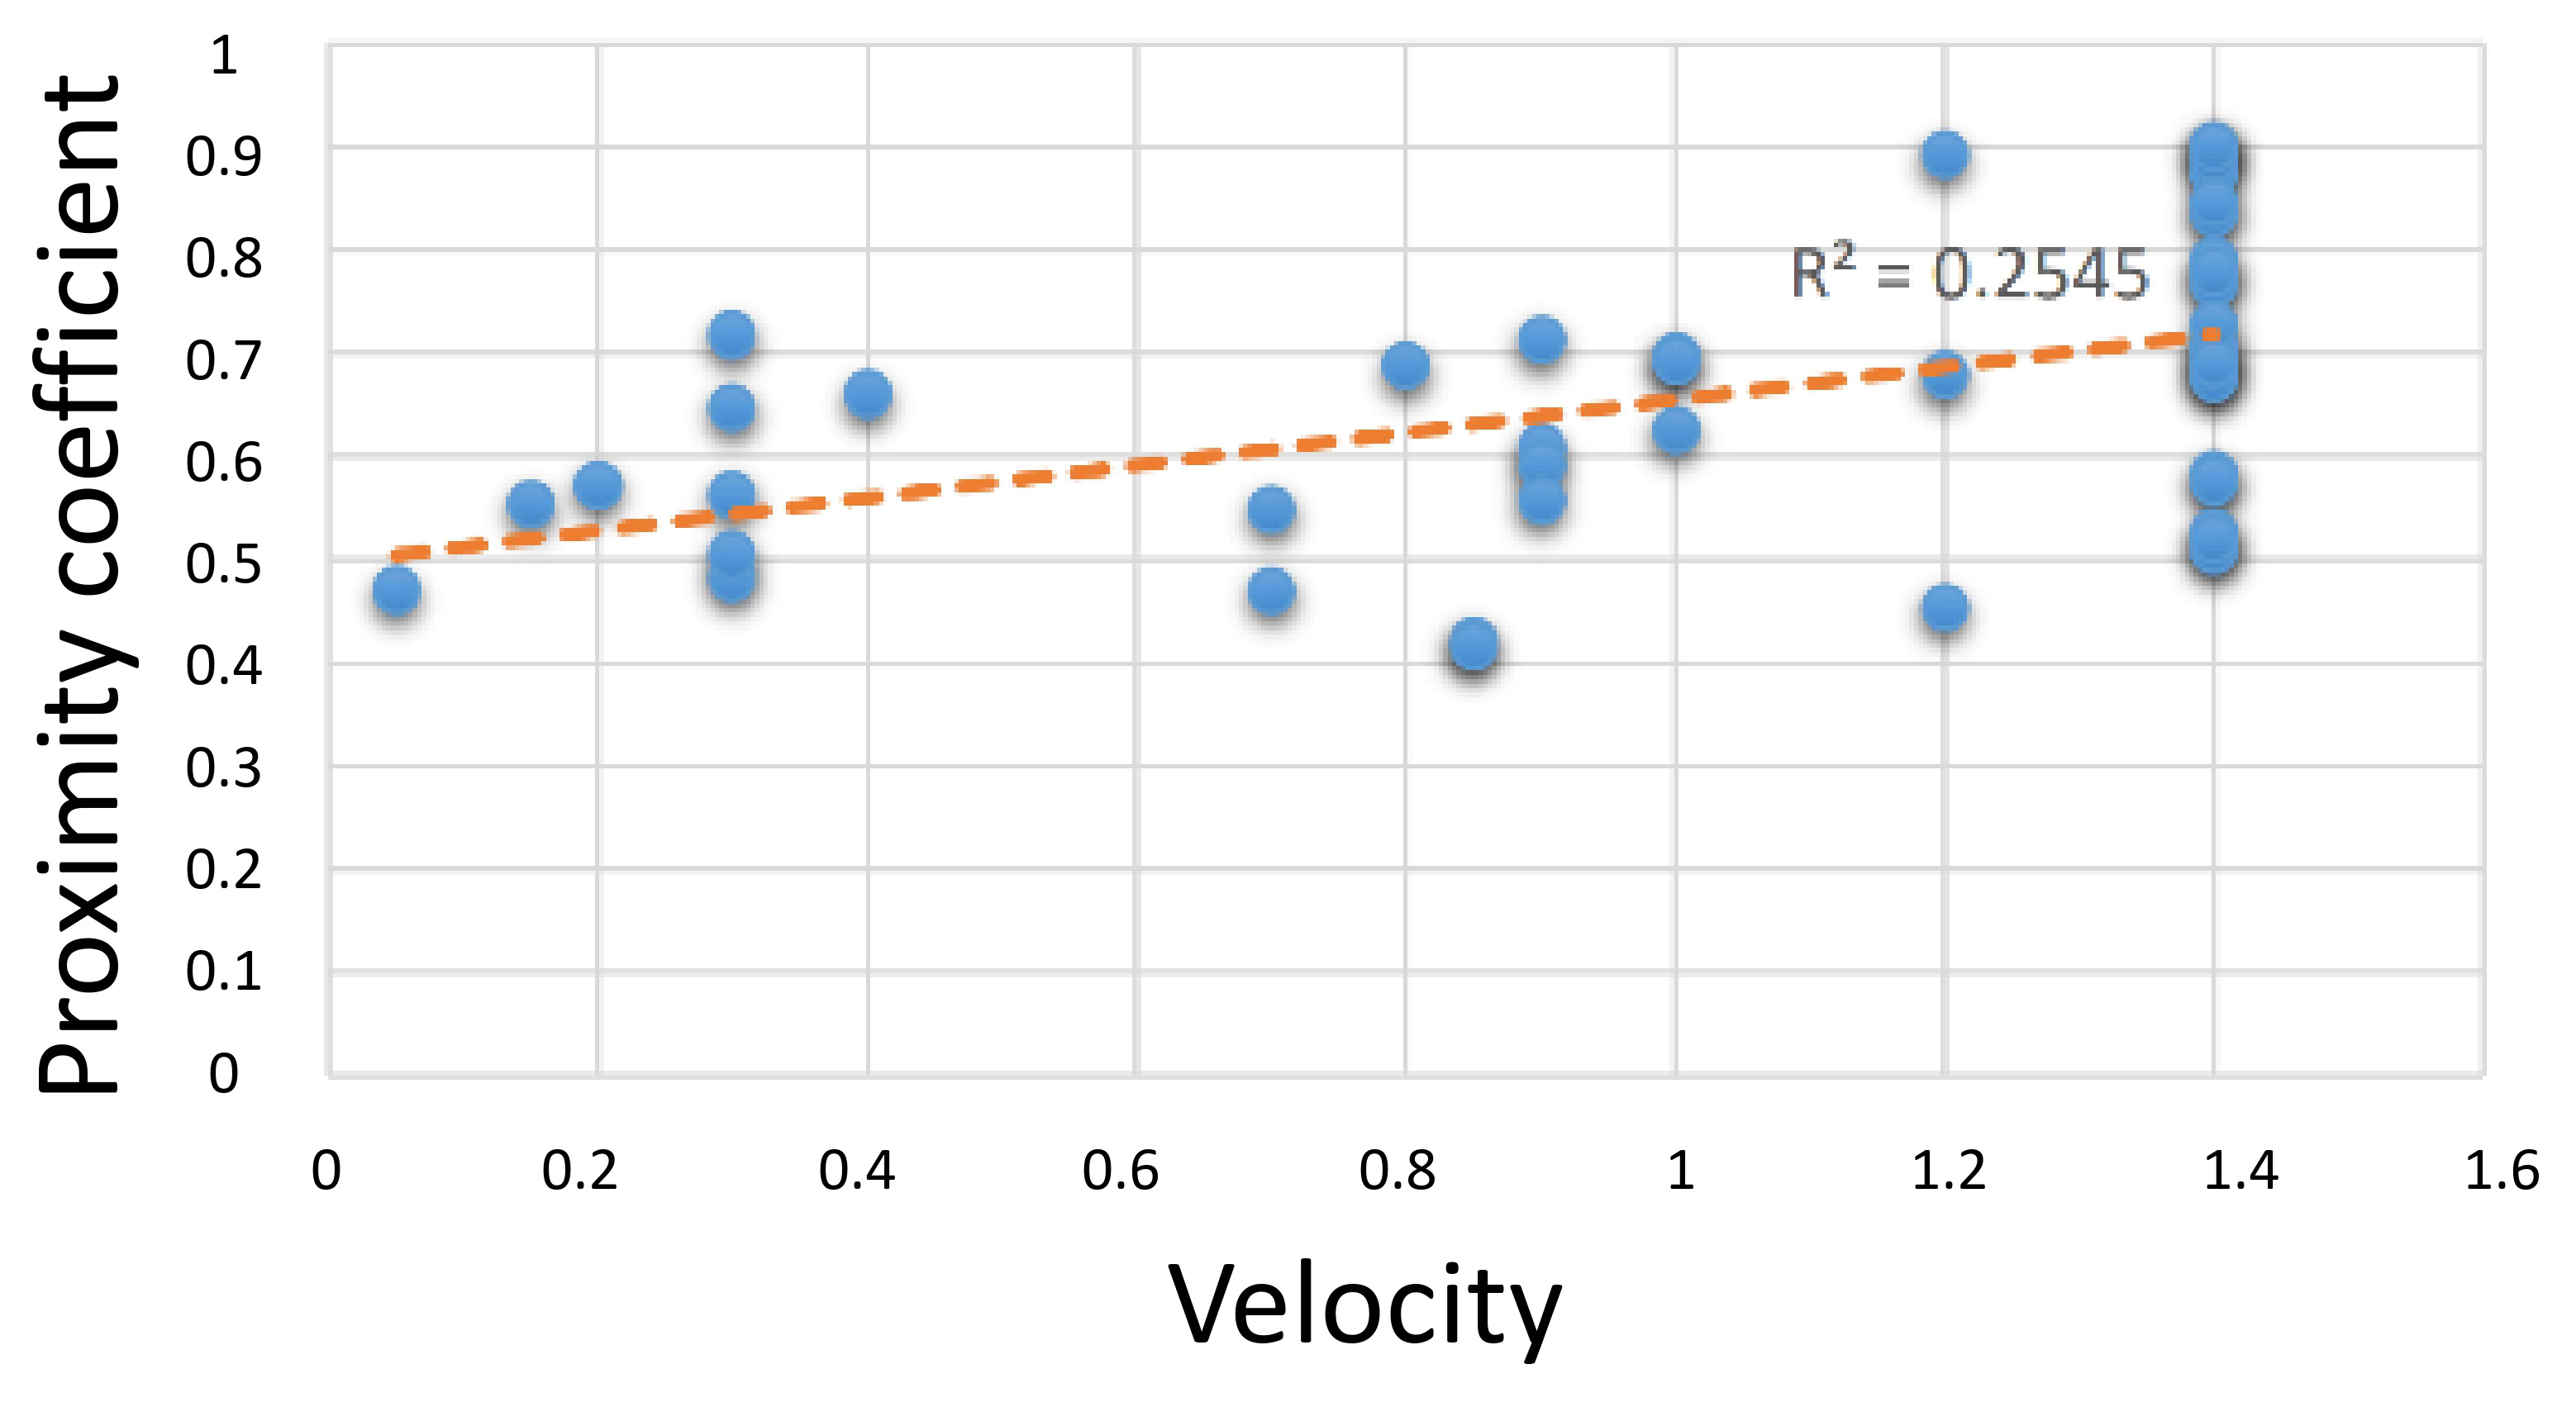 Linear regression analysis coefficient of the proximity of 4 variables dependent and function variable (velocity).